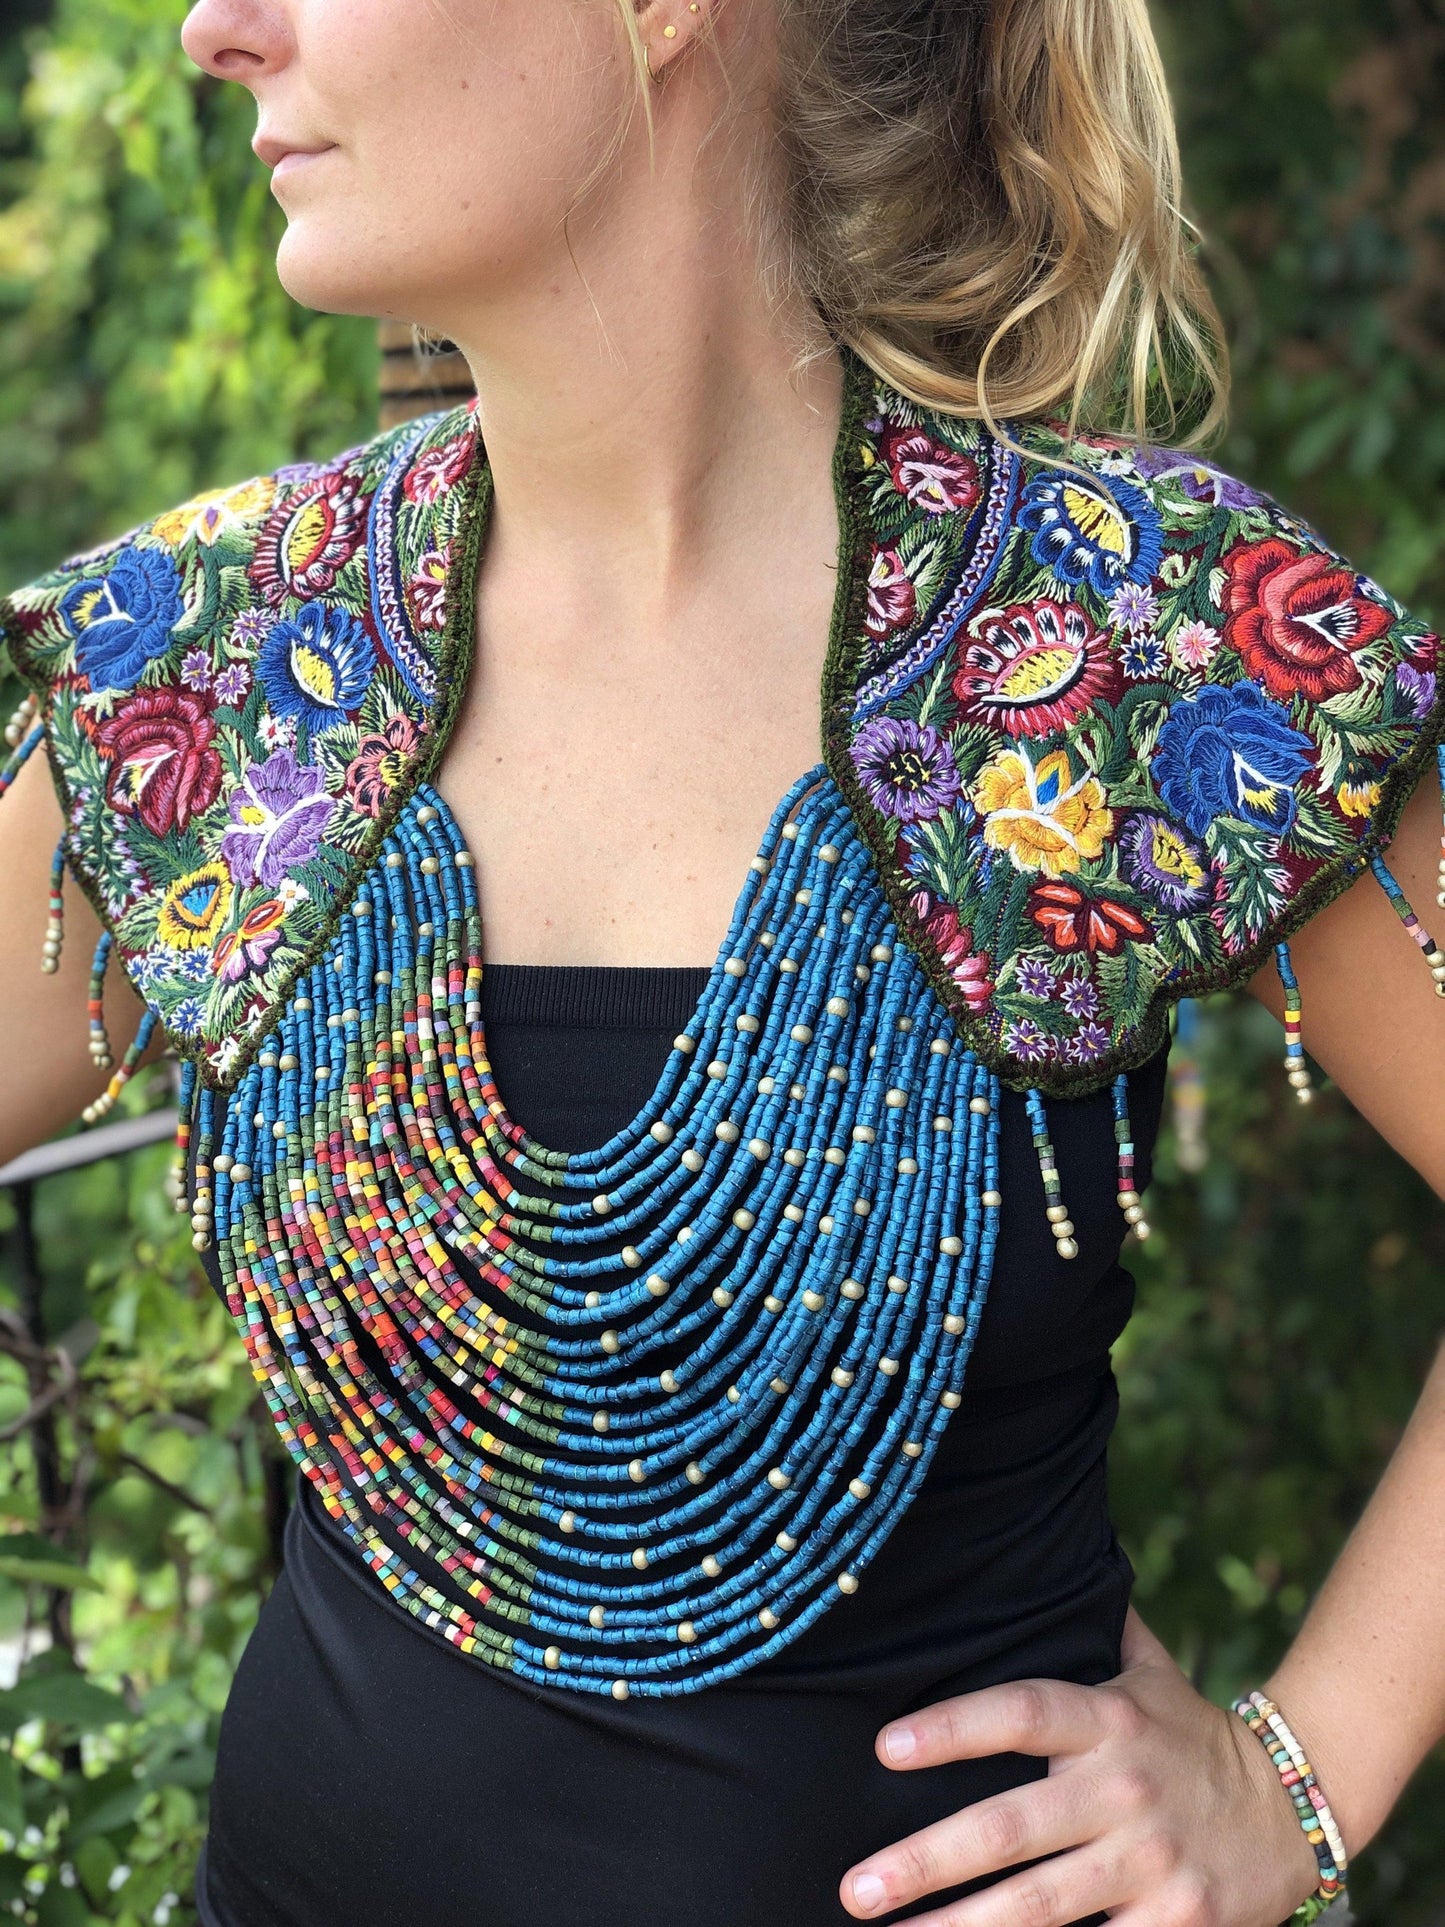 Textile Shoulder Pieces with Beaded Chains - "Huipil"